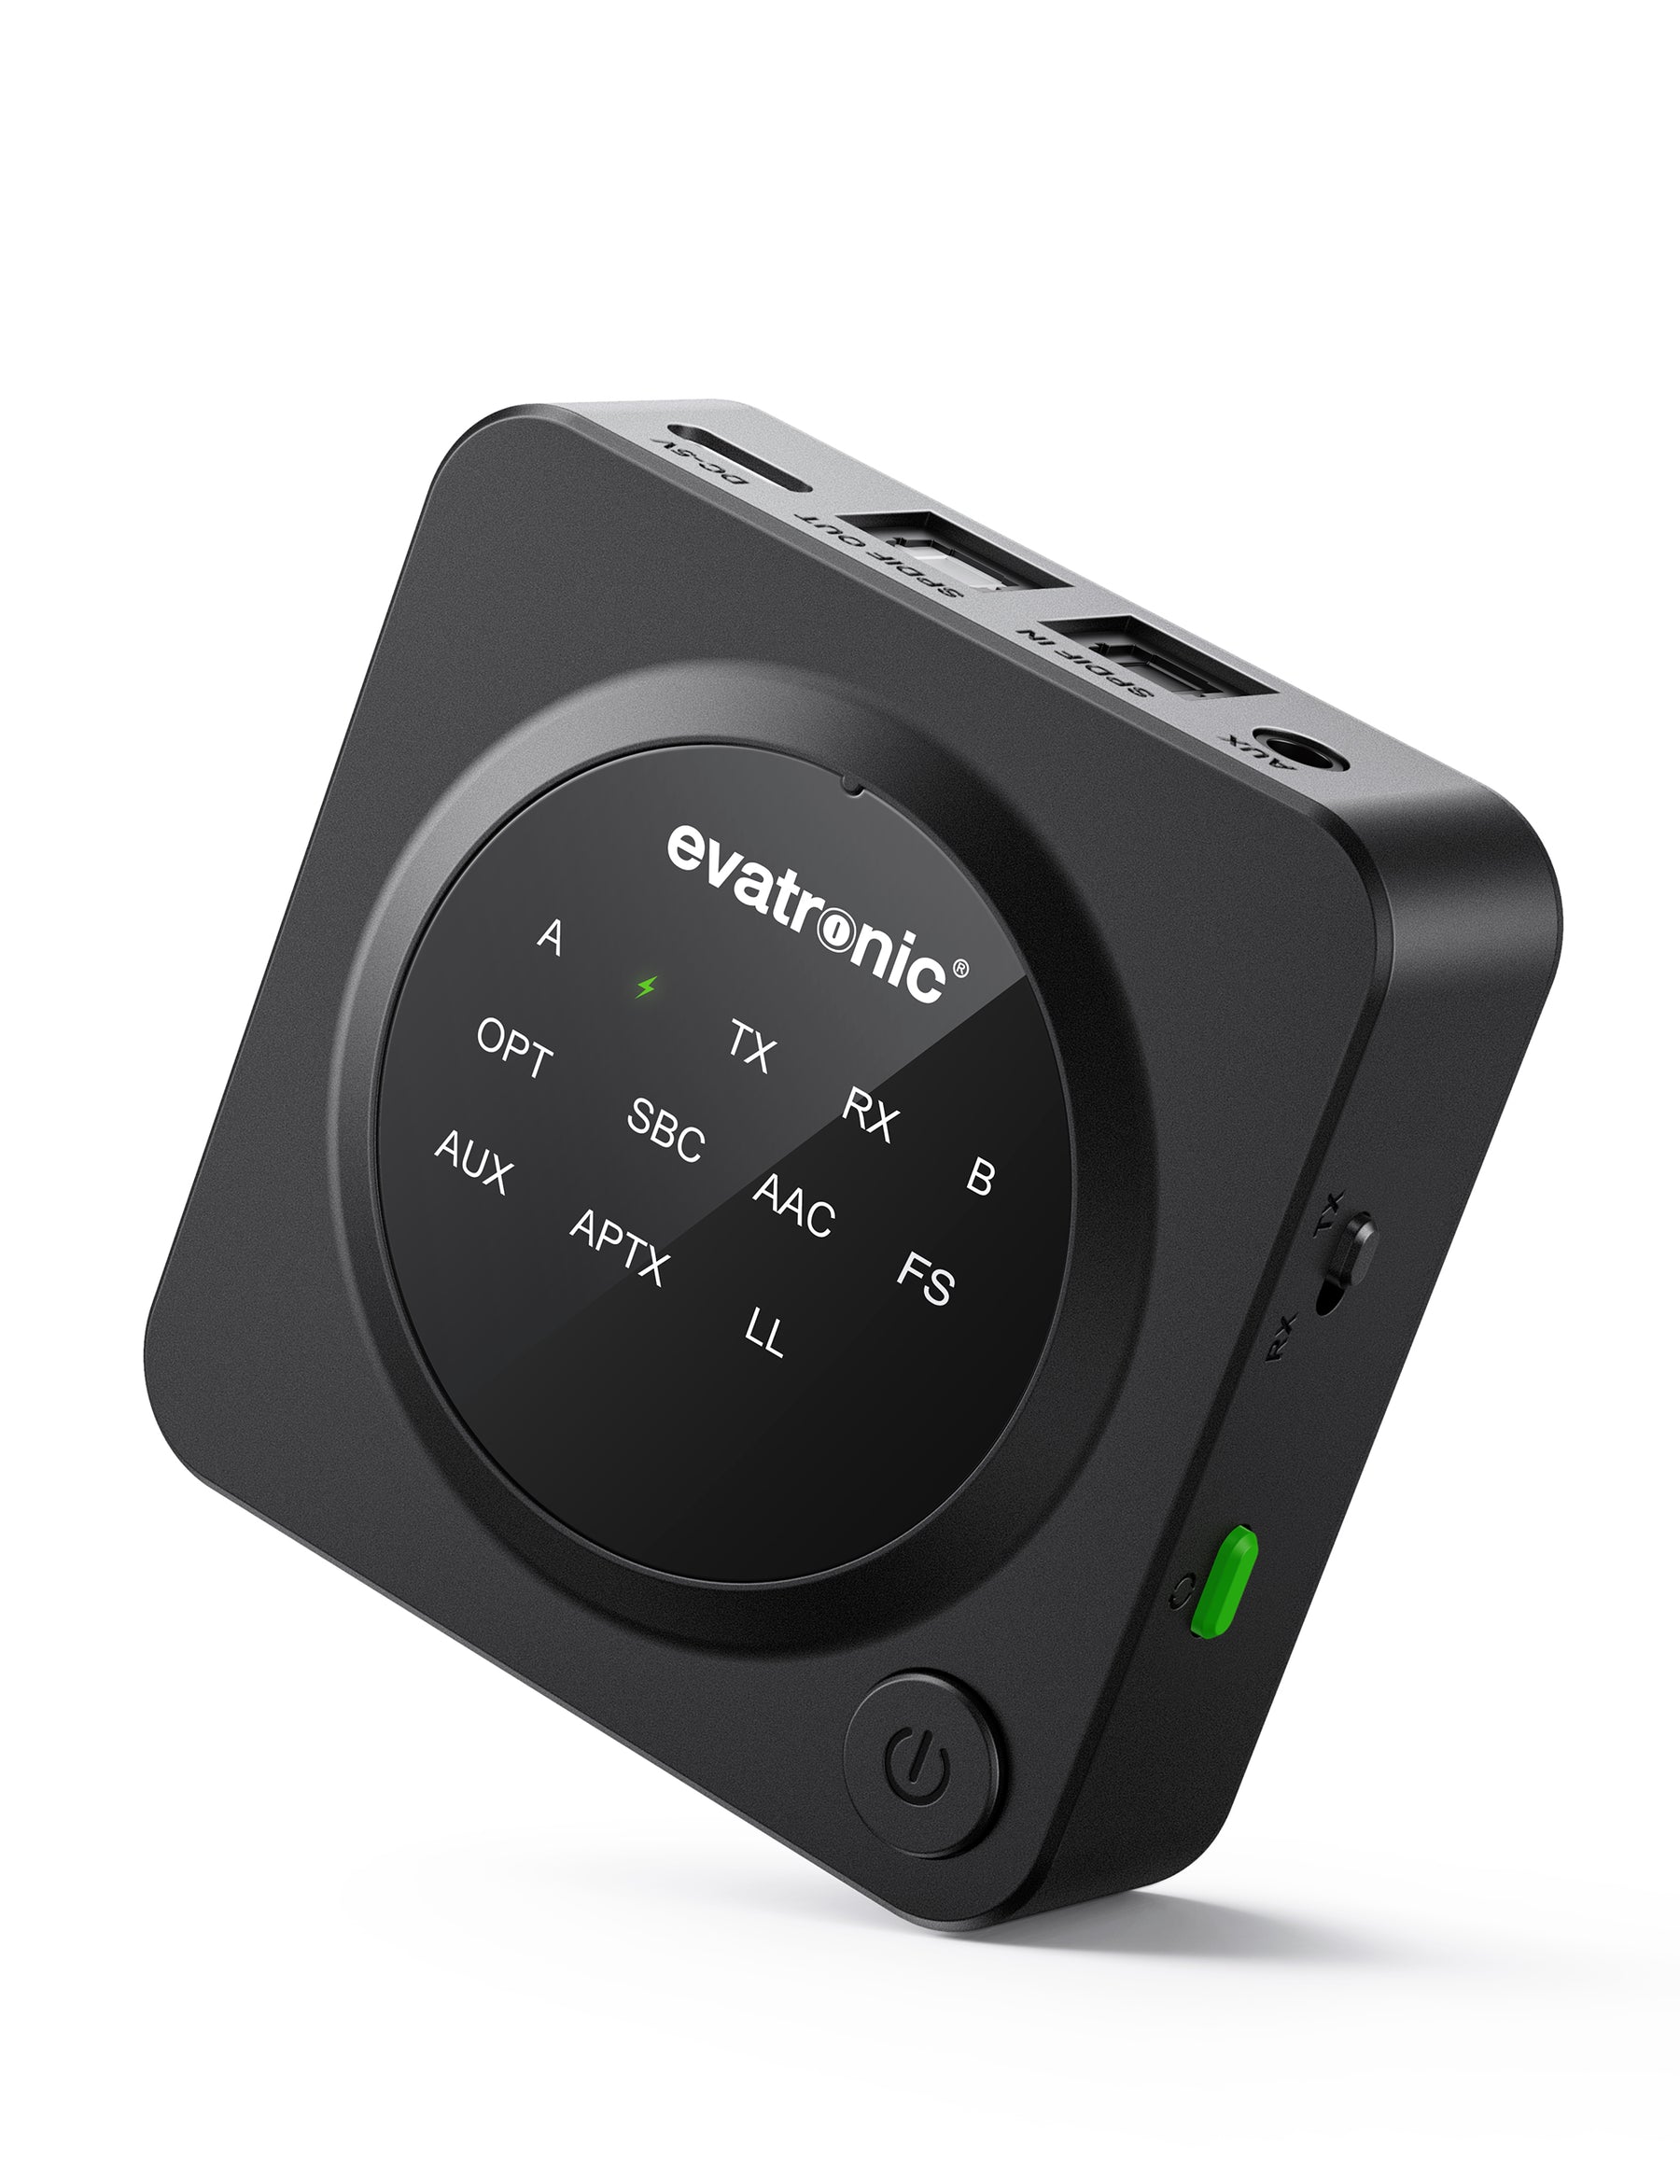 2 In 1 Bluetooth TV Transmitter Receiver, Make Non-Bluetooth Items Bluetooth